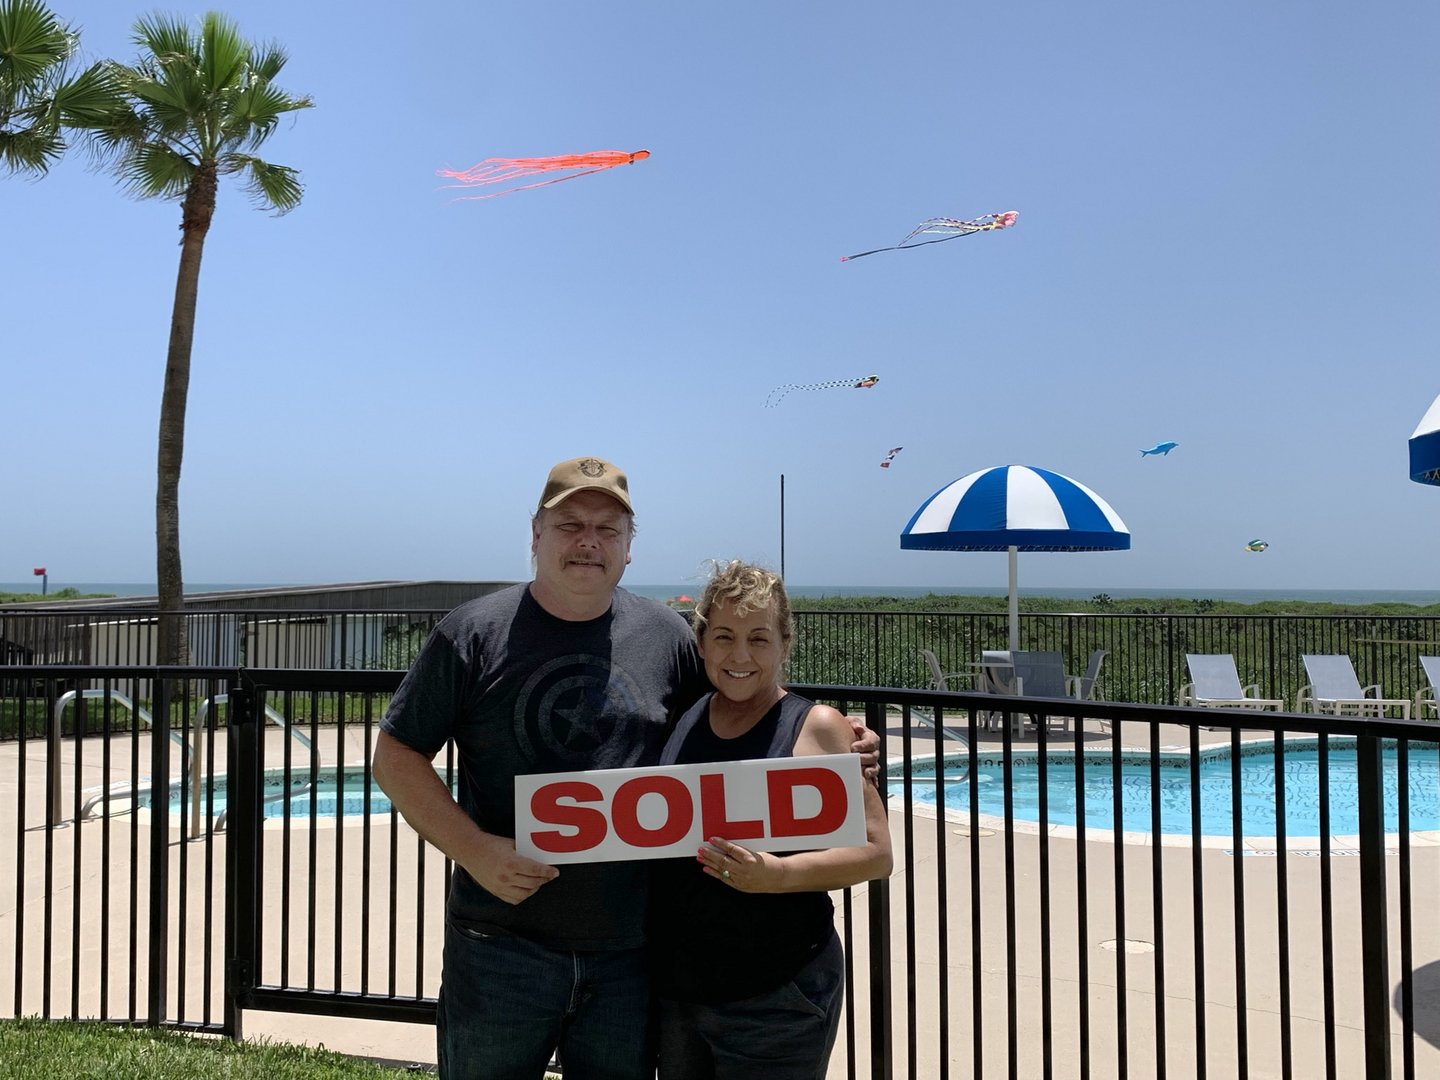  Dina Rich is the consummate professional. We selected her to help us with a beach property purchase because she had consistent high ratings and was easy to get in touch with to start the process. Dina has a deep understanding of the South Padre Isla